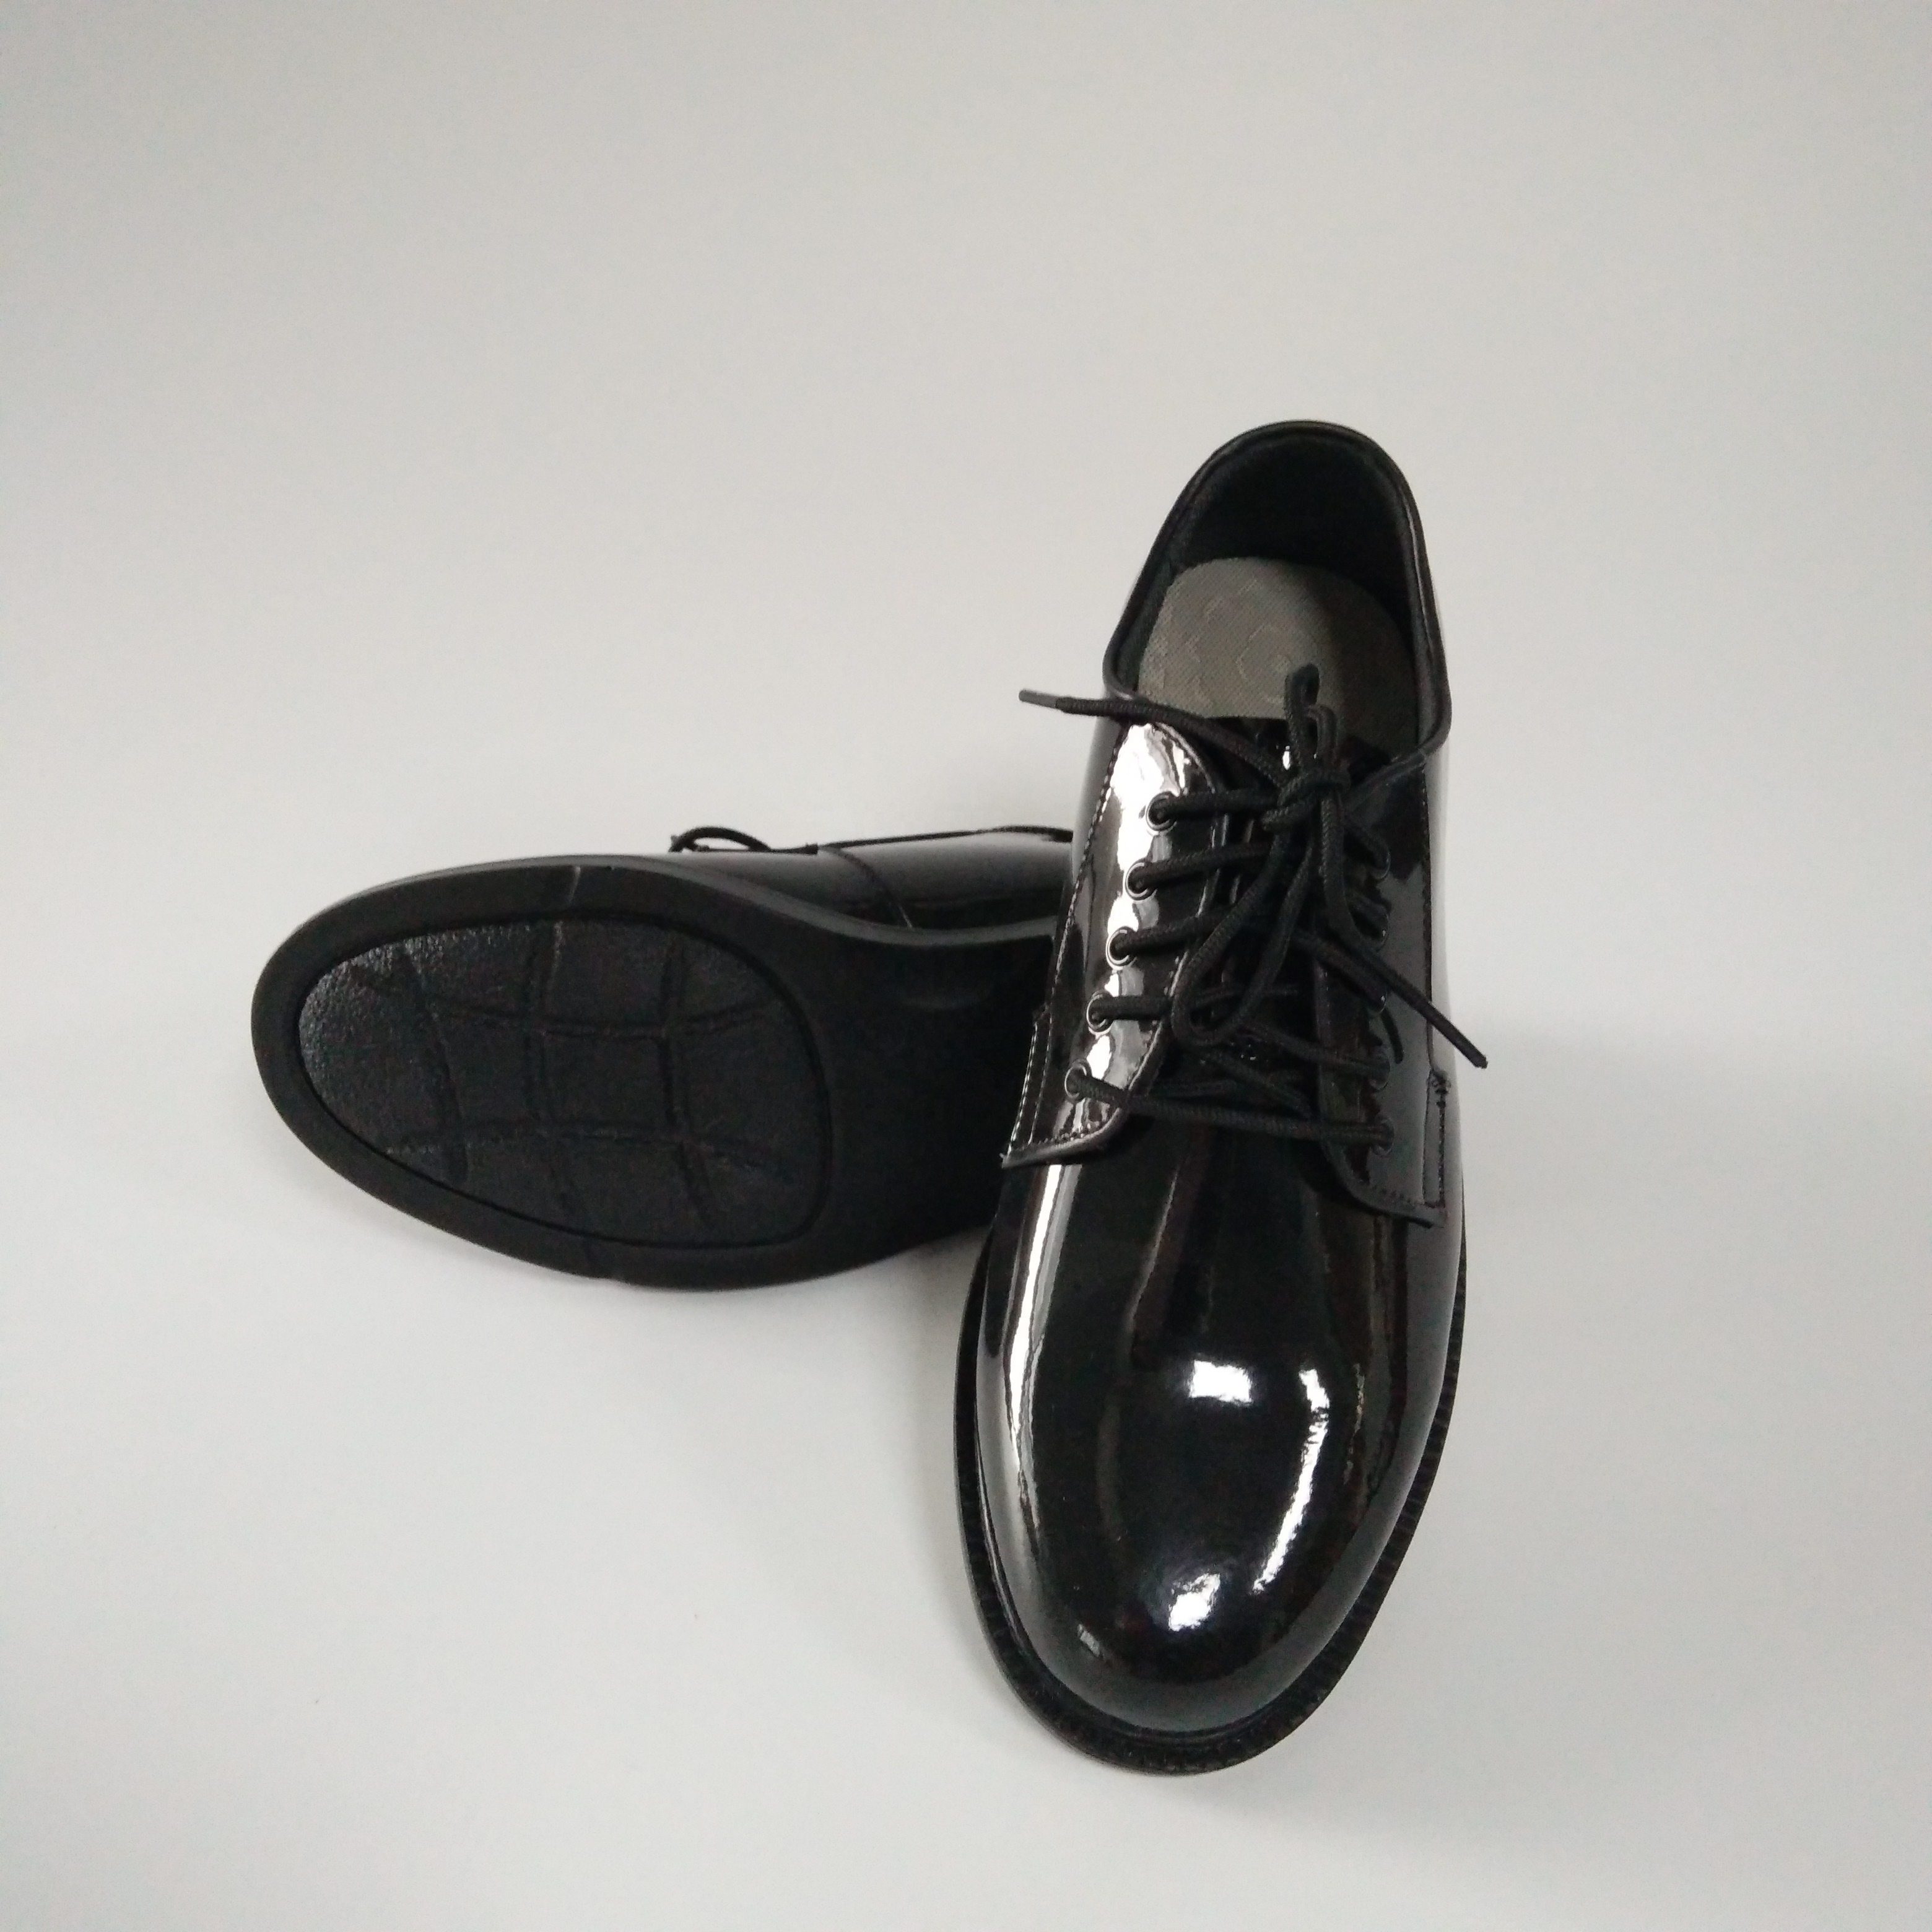 Black Genuine Leather Office Shoes National Ceremonial leather shoes Shiny Business shoes